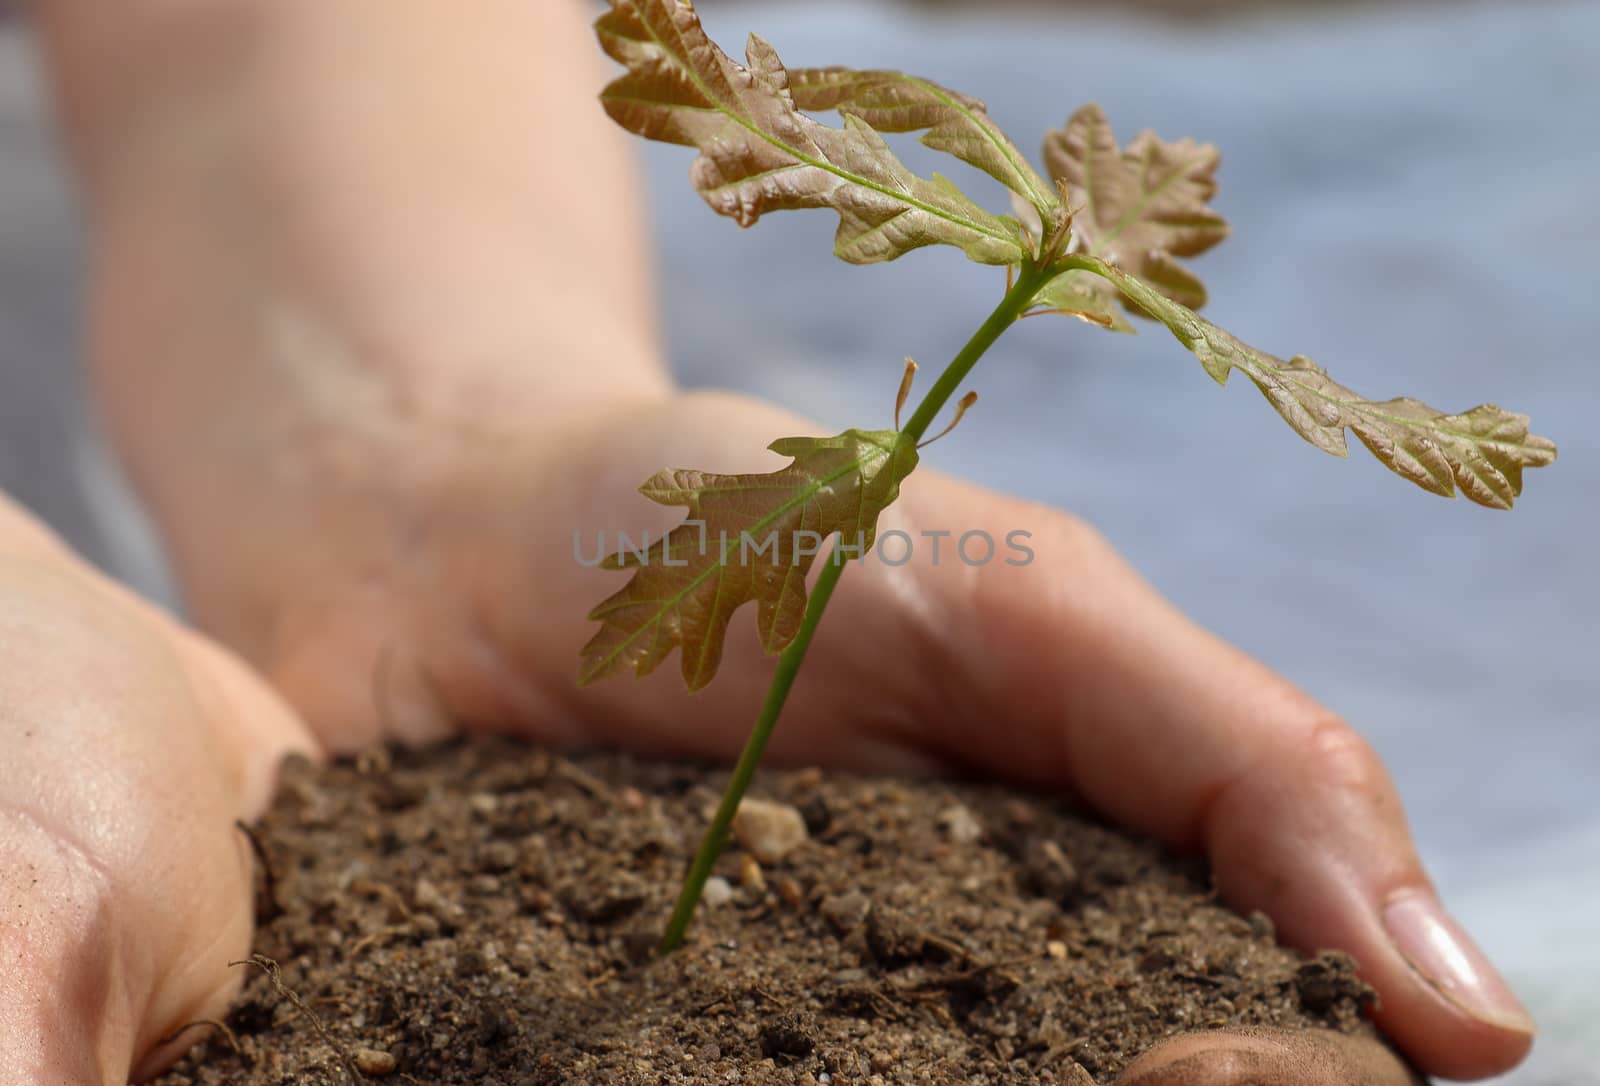 Human hands of a young woman holding green small plant seedling. by MP_foto71